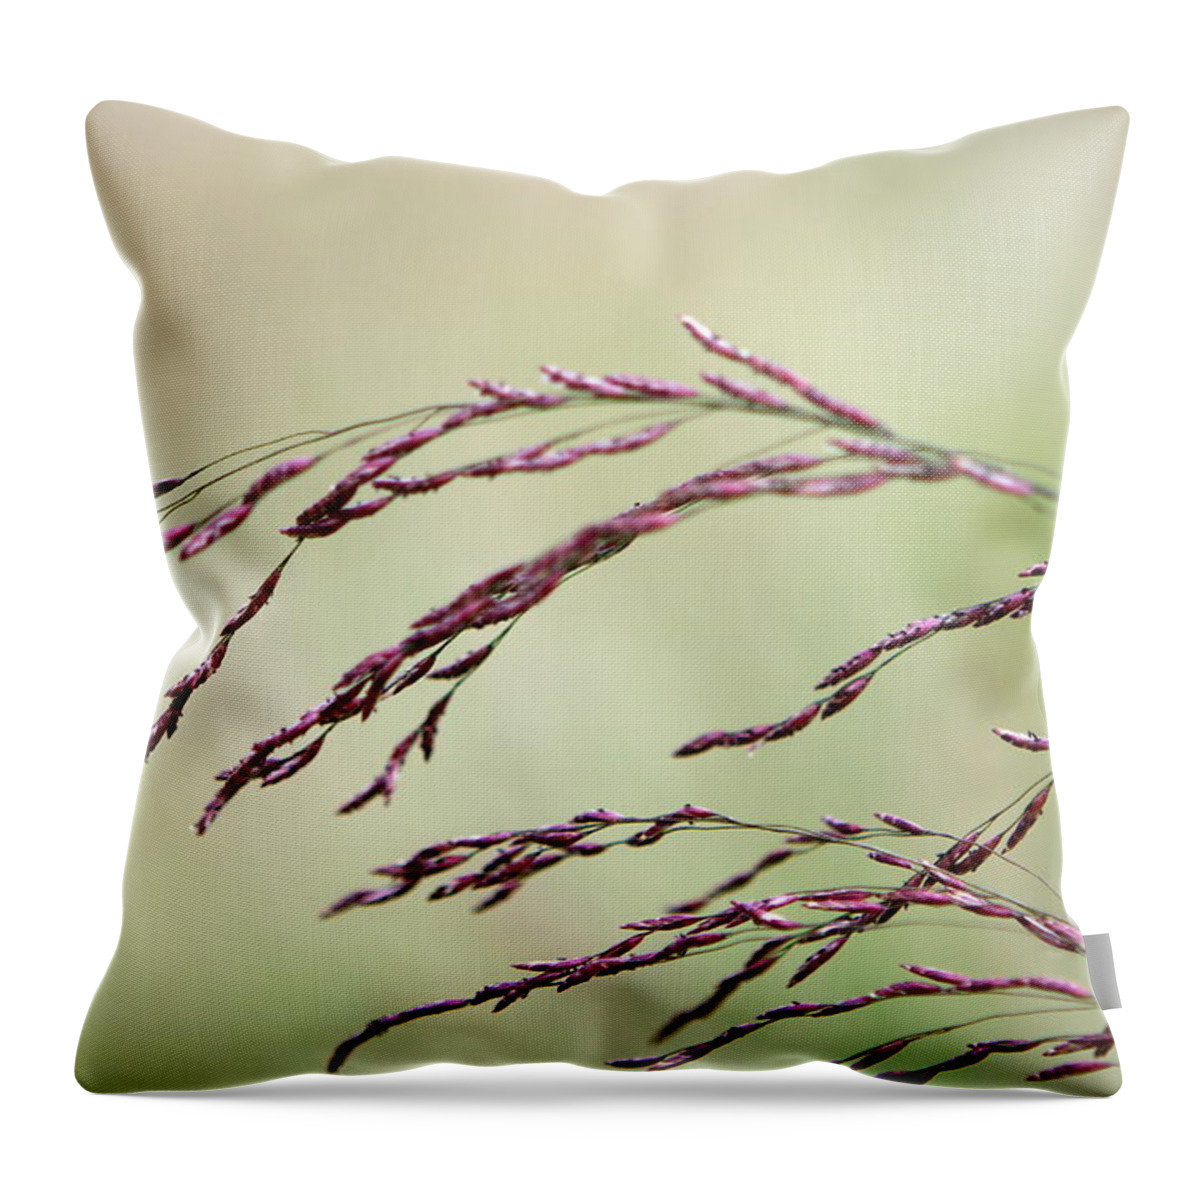 Grass Throw Pillow featuring the photograph Grass Seed by Leeon Photo